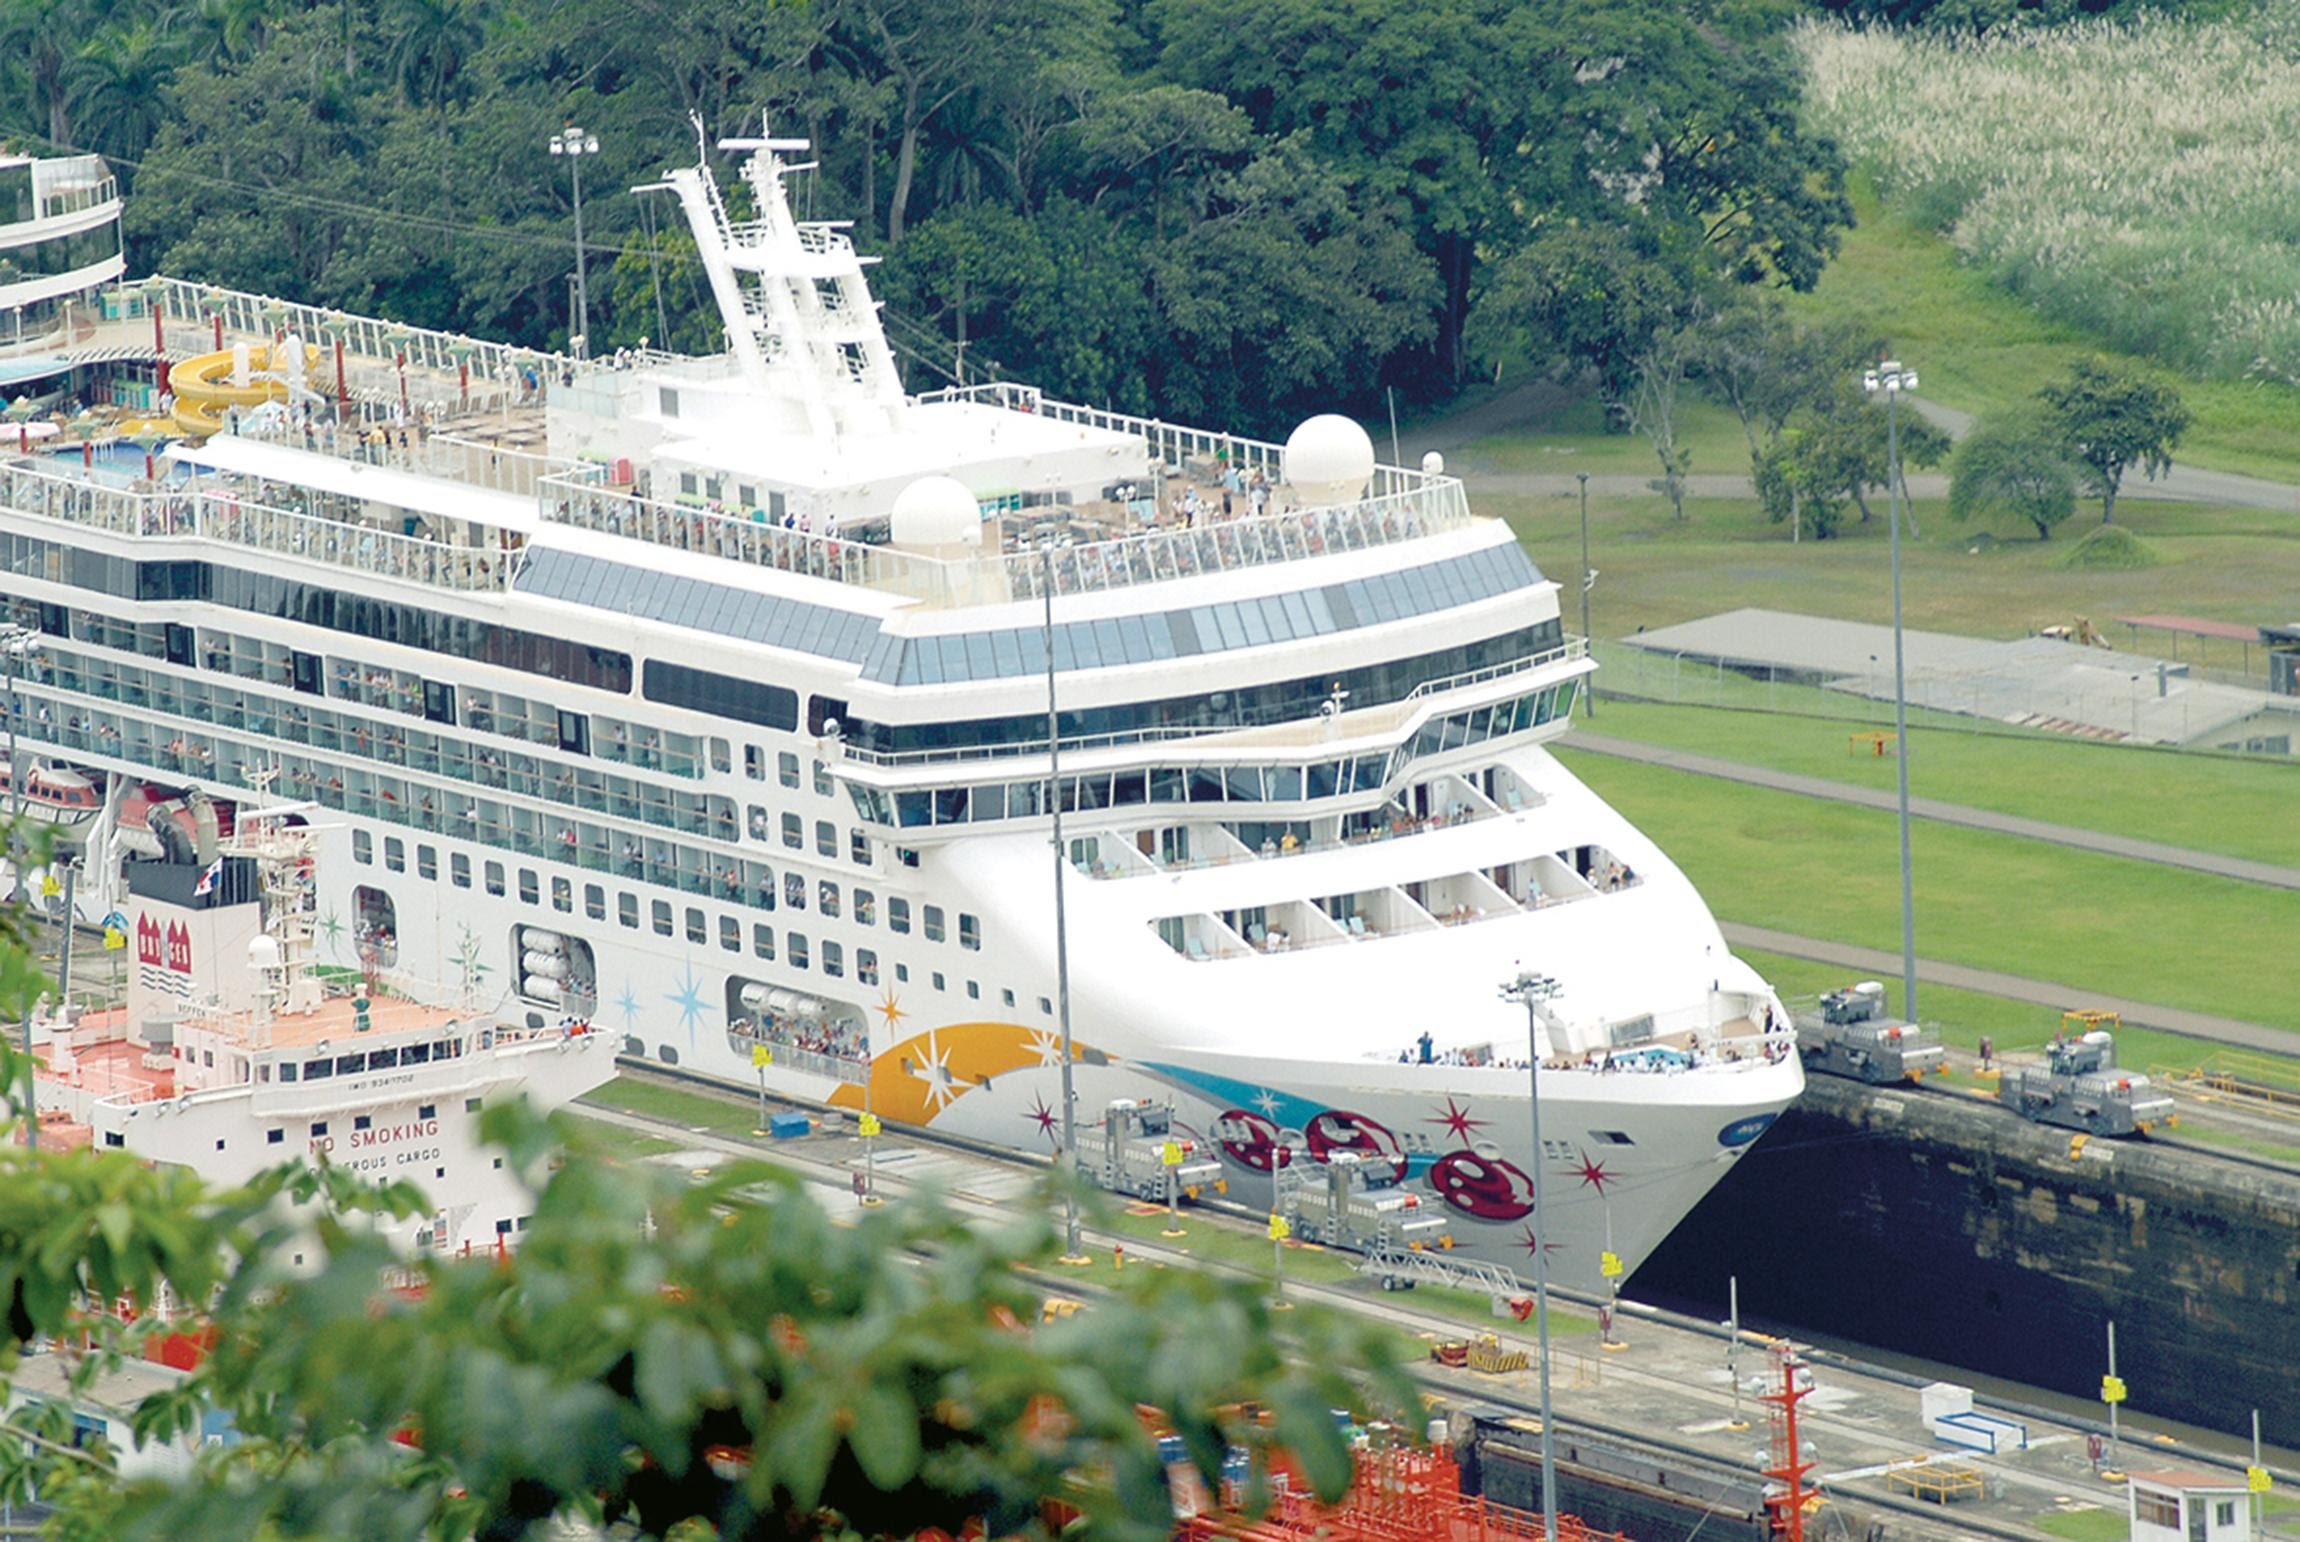 Travel by cruise ship to Panama Canal (HD) - YouTube